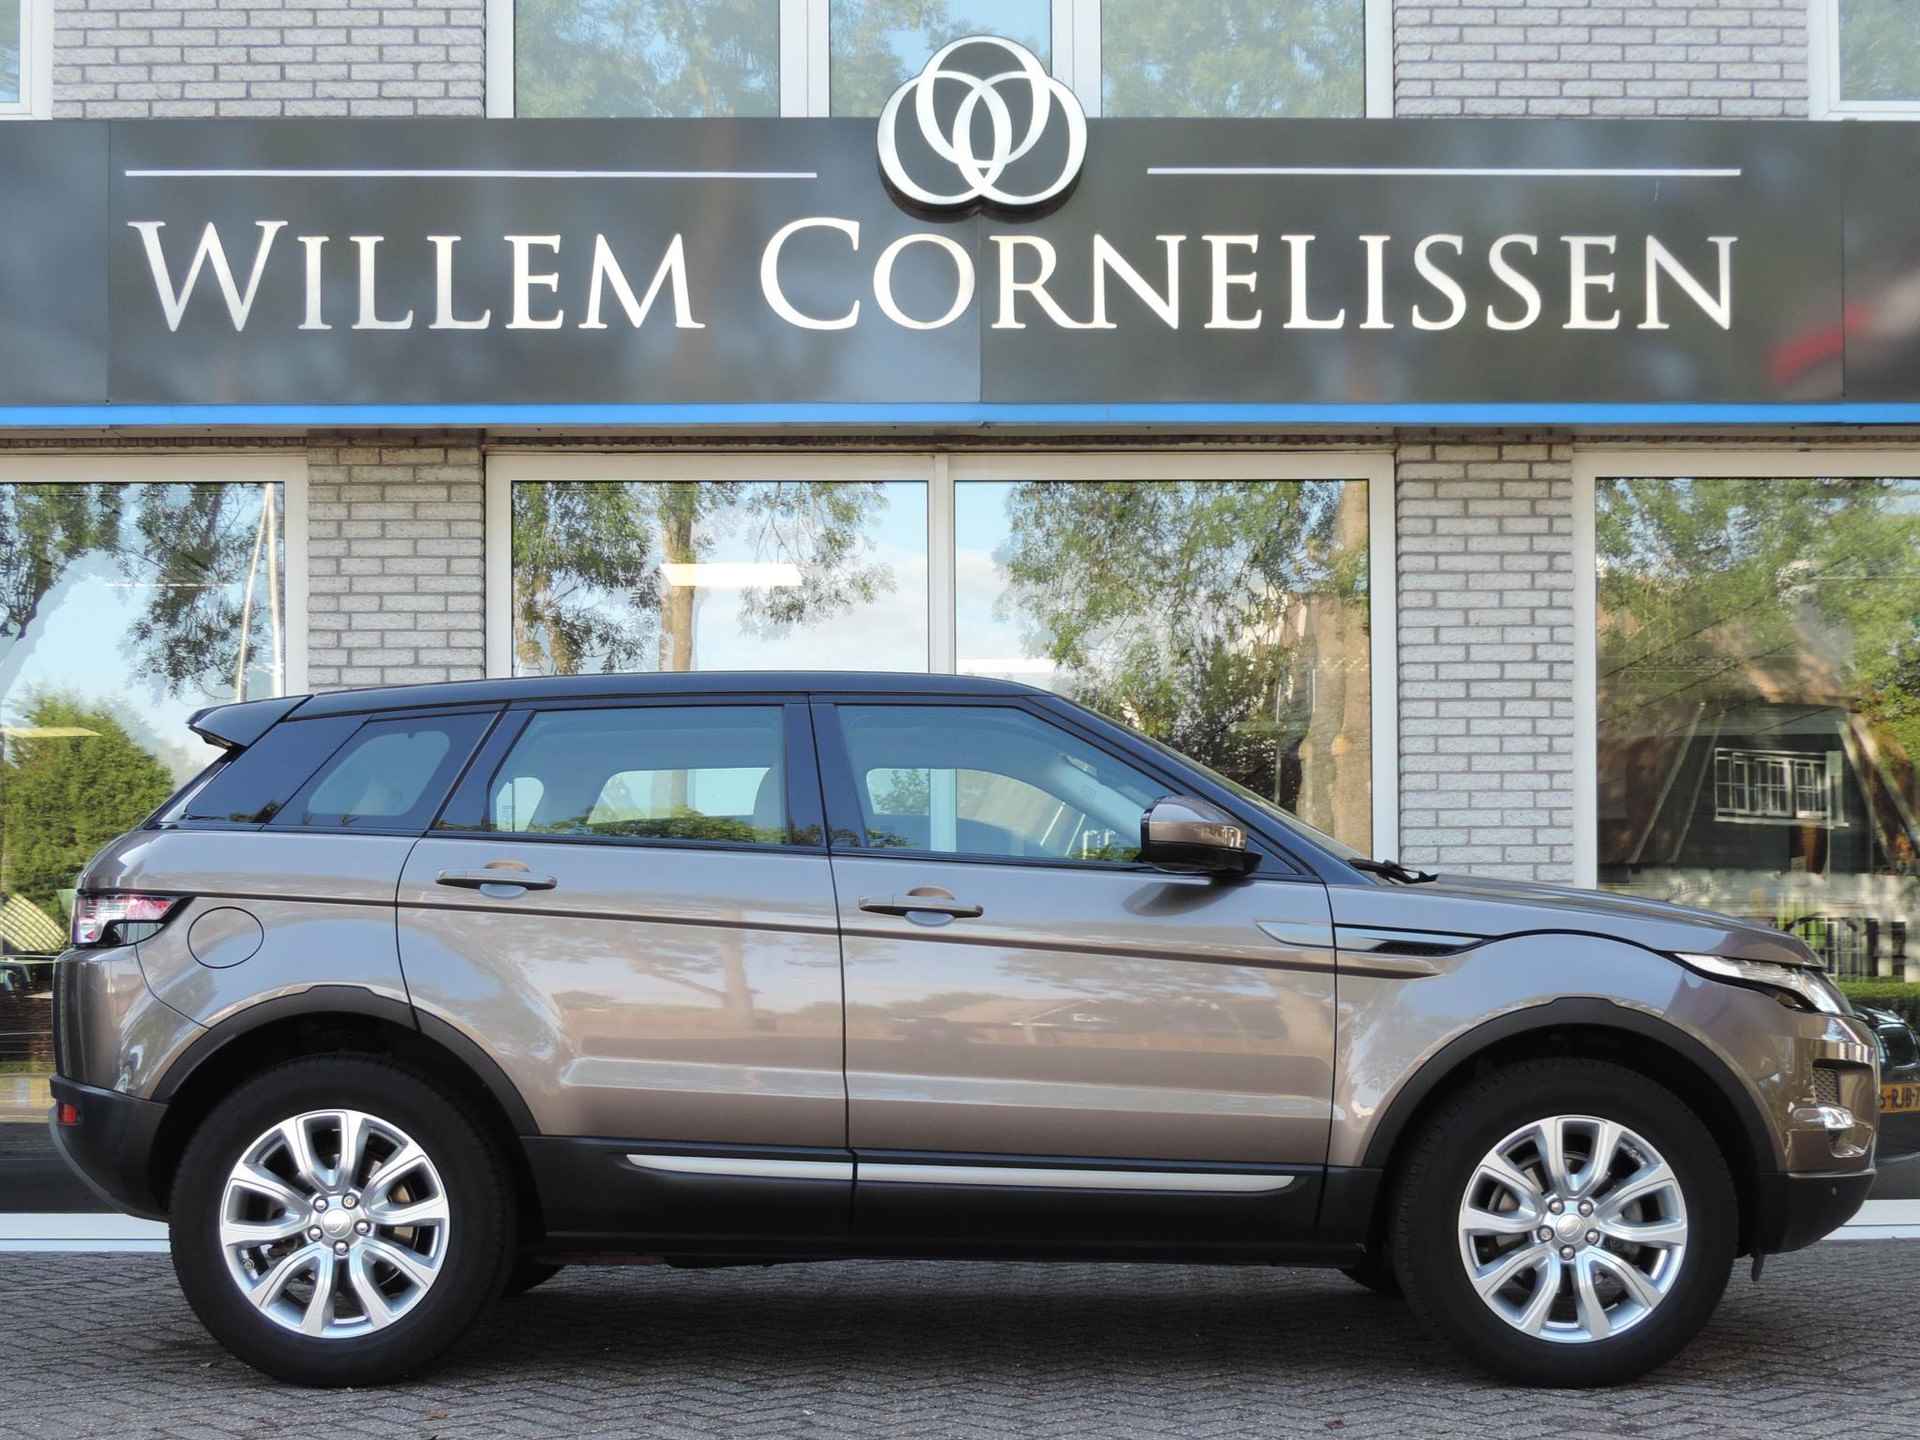 Land Rover Range Rover Evoque 2.2 TD4 Aut 4WD Pure Business Edition Pano Camera - 3/33